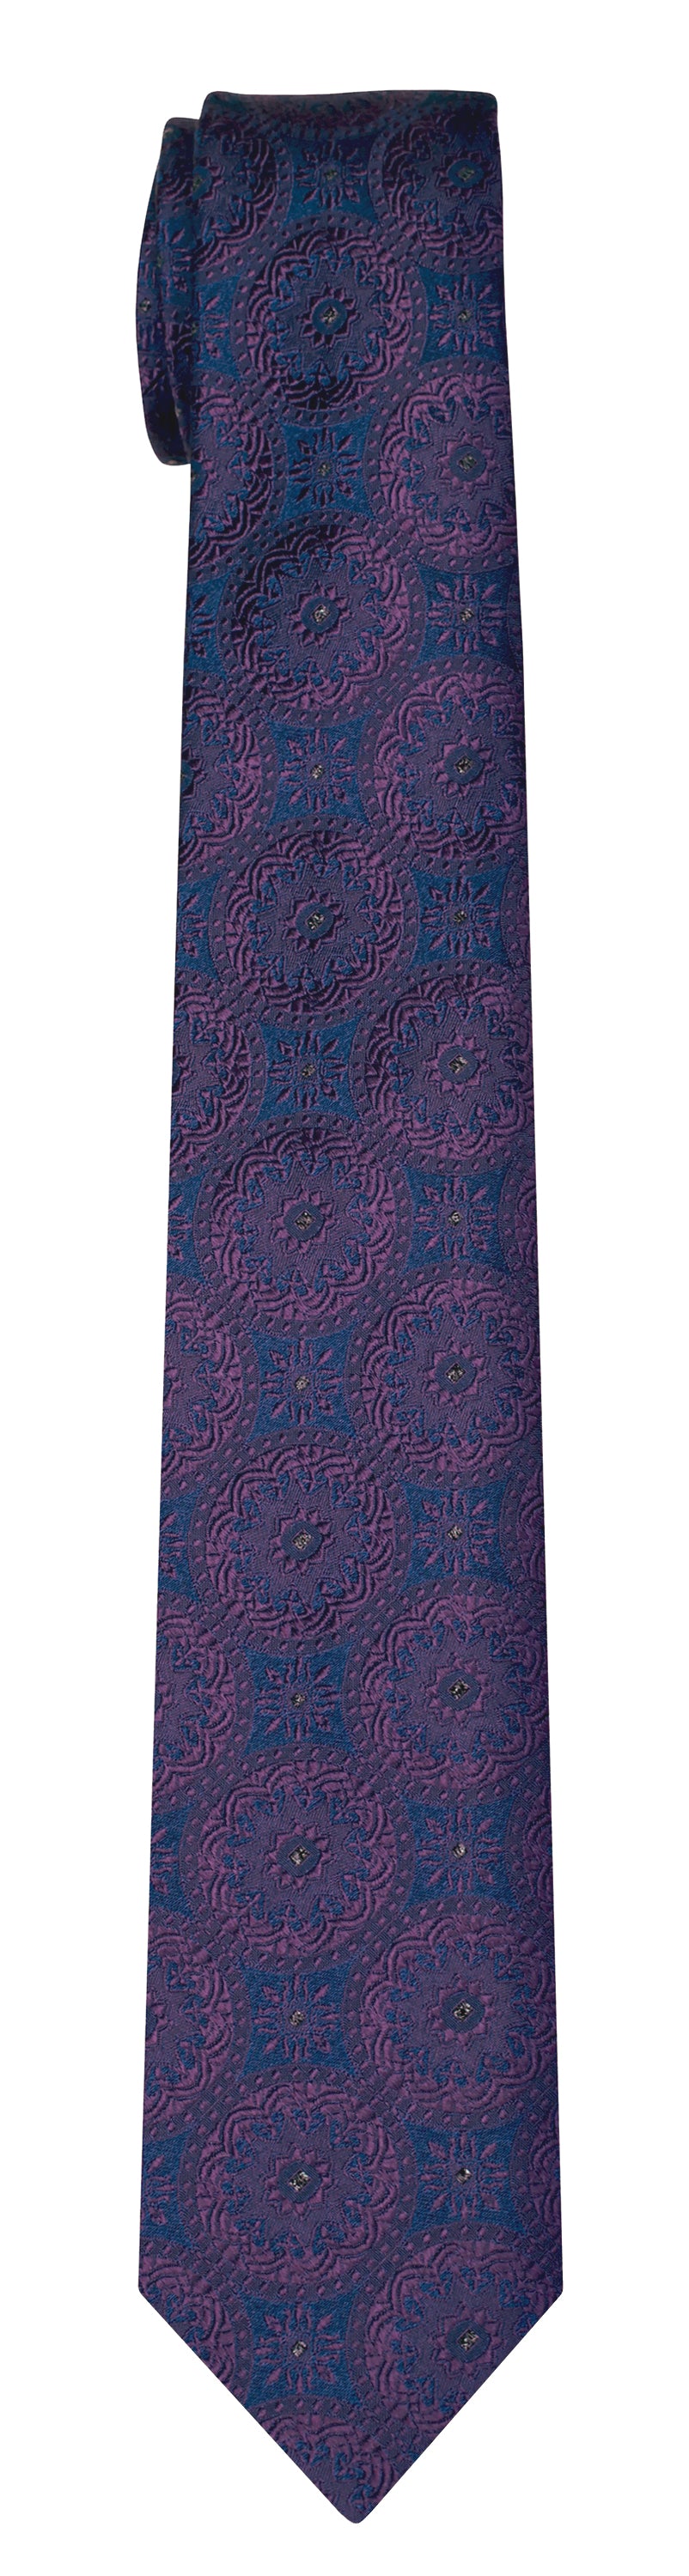 Mimi Fong Coin Tie in Midnight